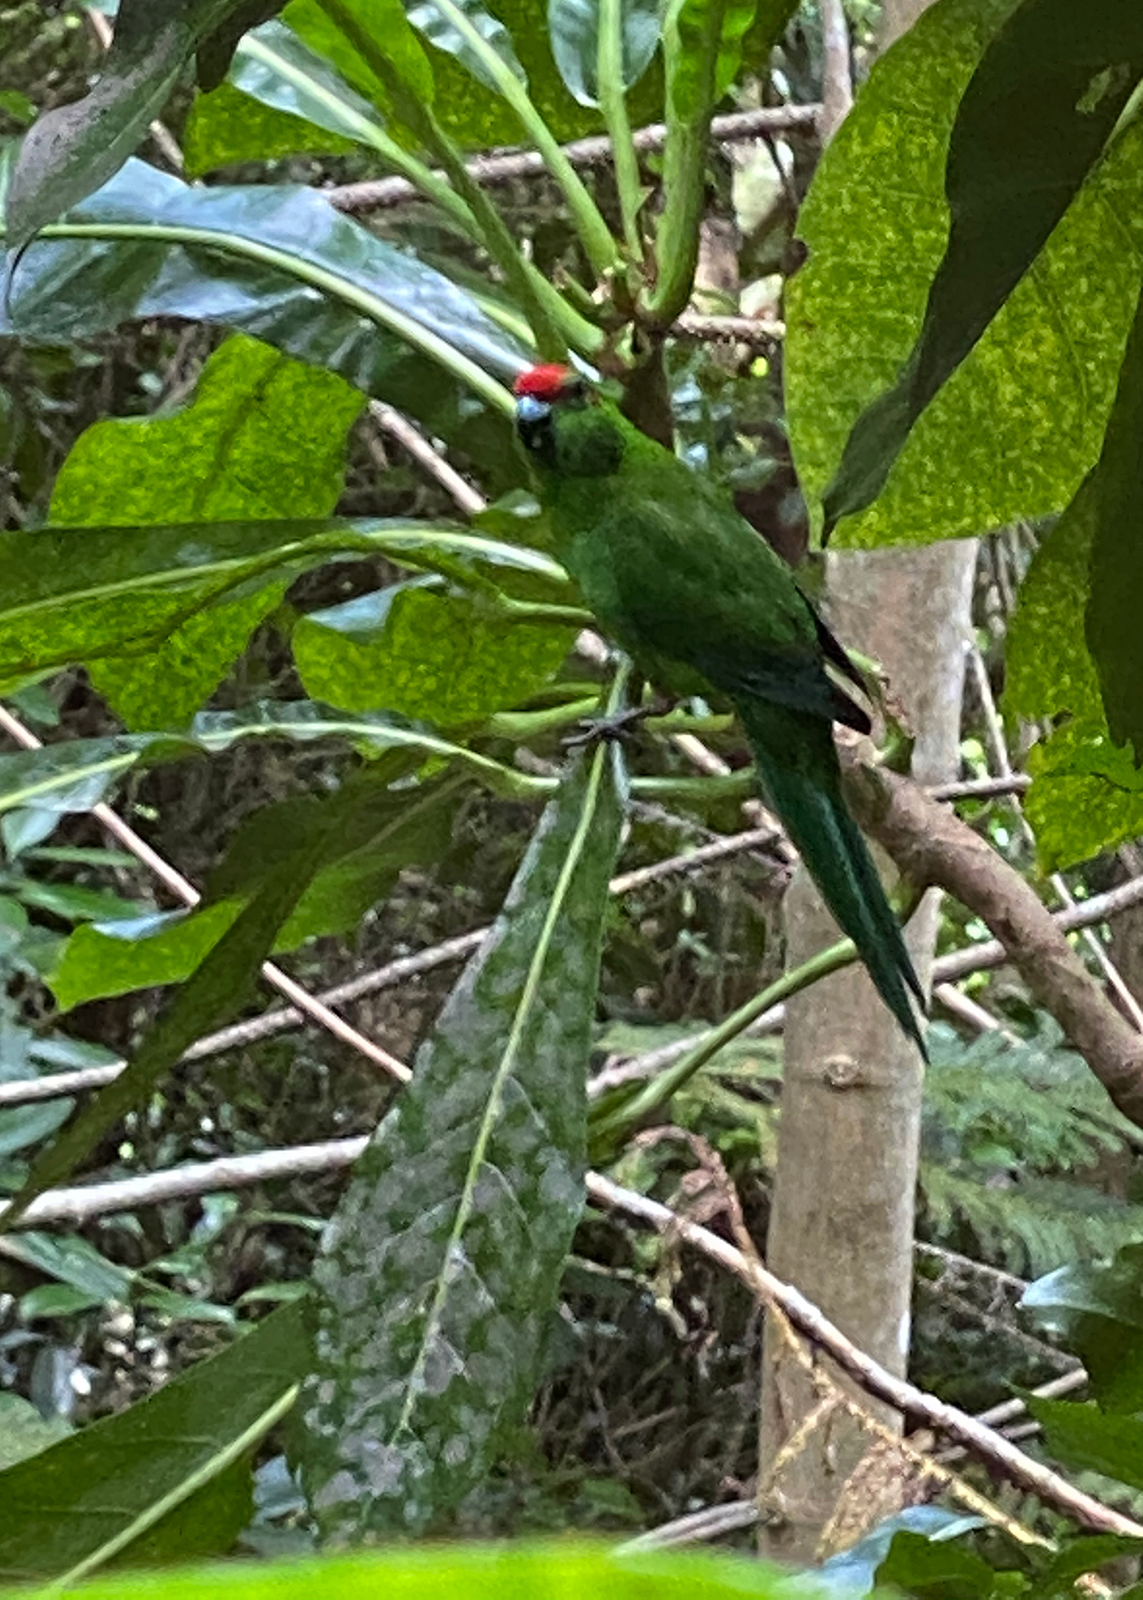 A green tropical bird is almost completely camouflaged by the surrounding foliage